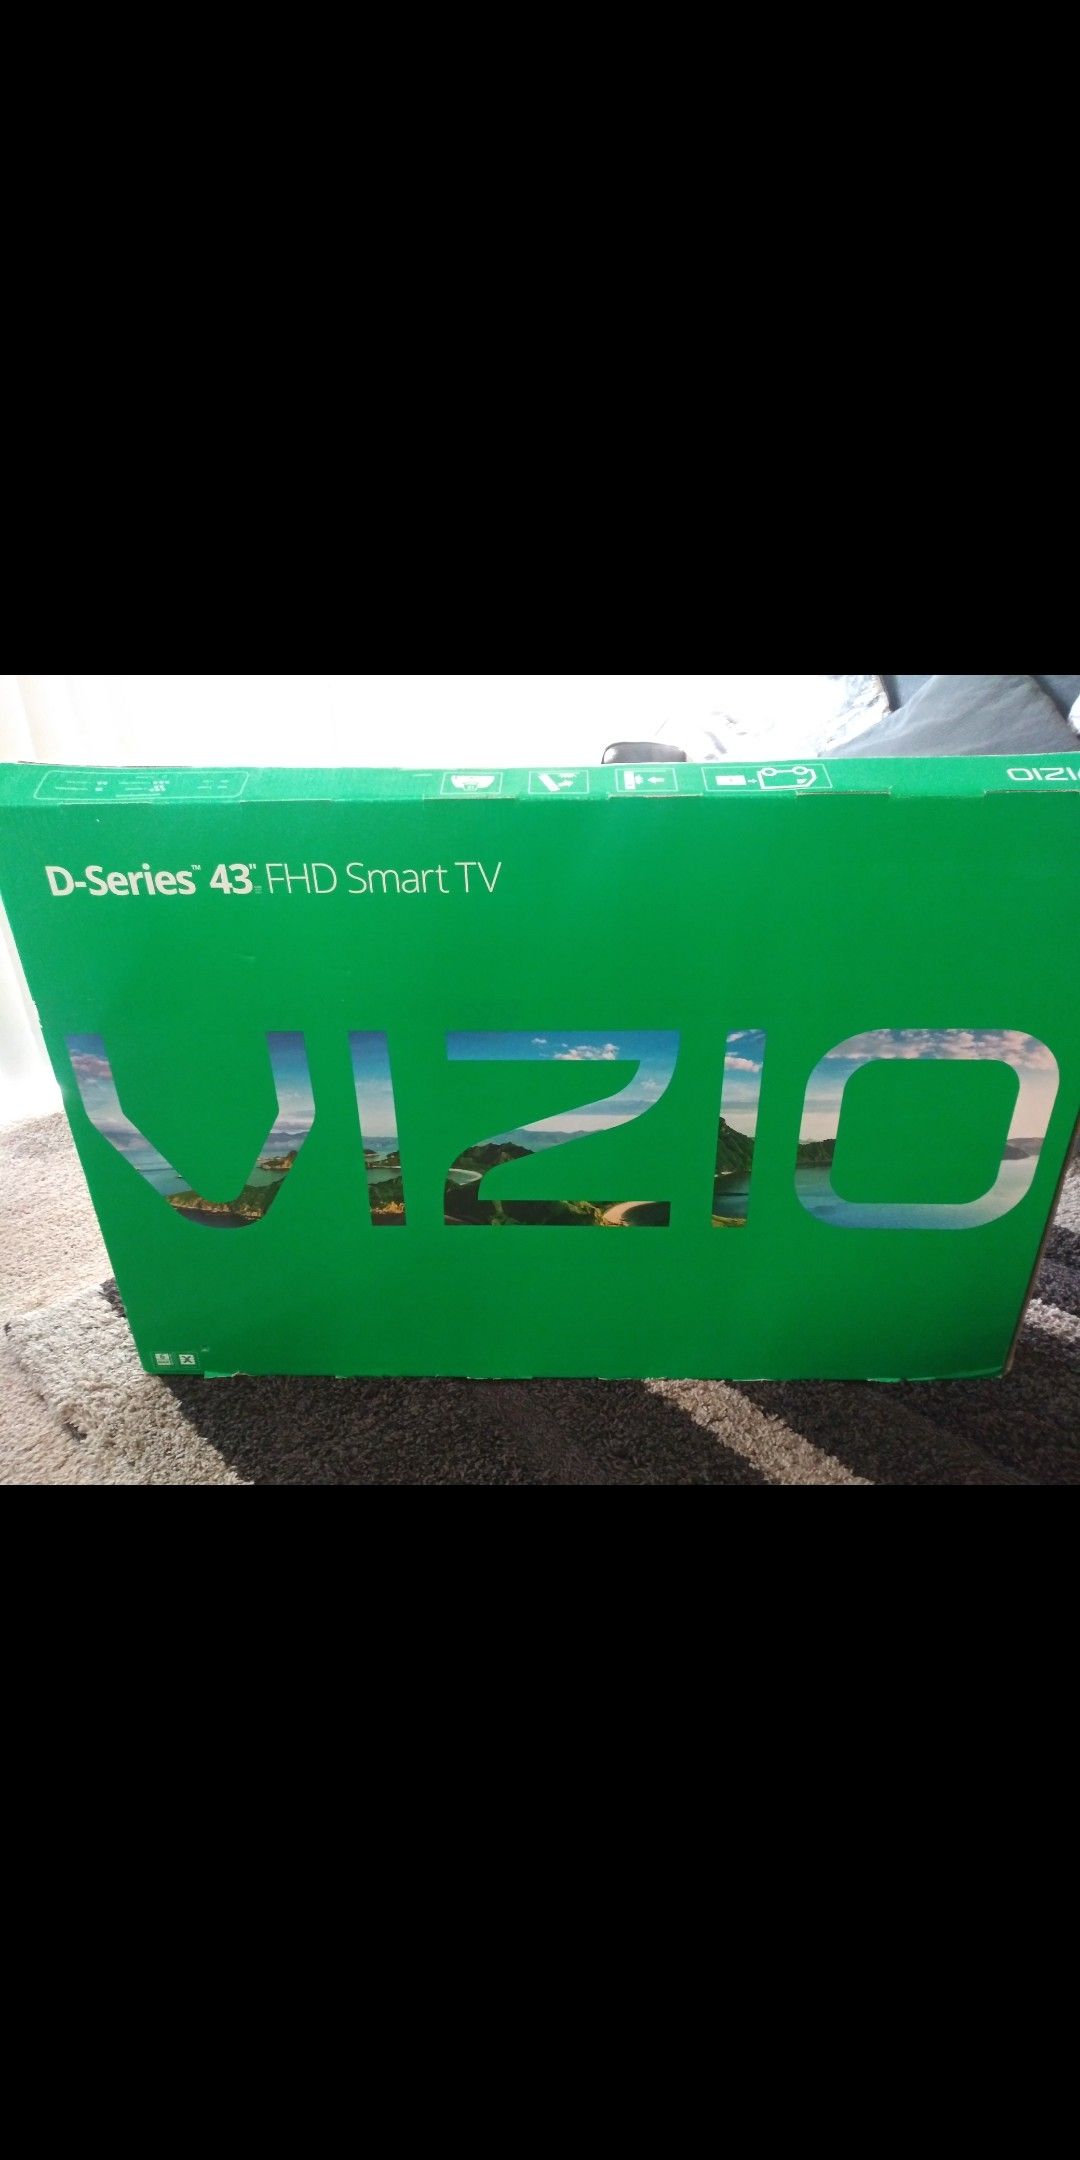 New VIZIO 43” FHD D-Series Crystal Clear Smart LED with Built In Chromecast $230 obo